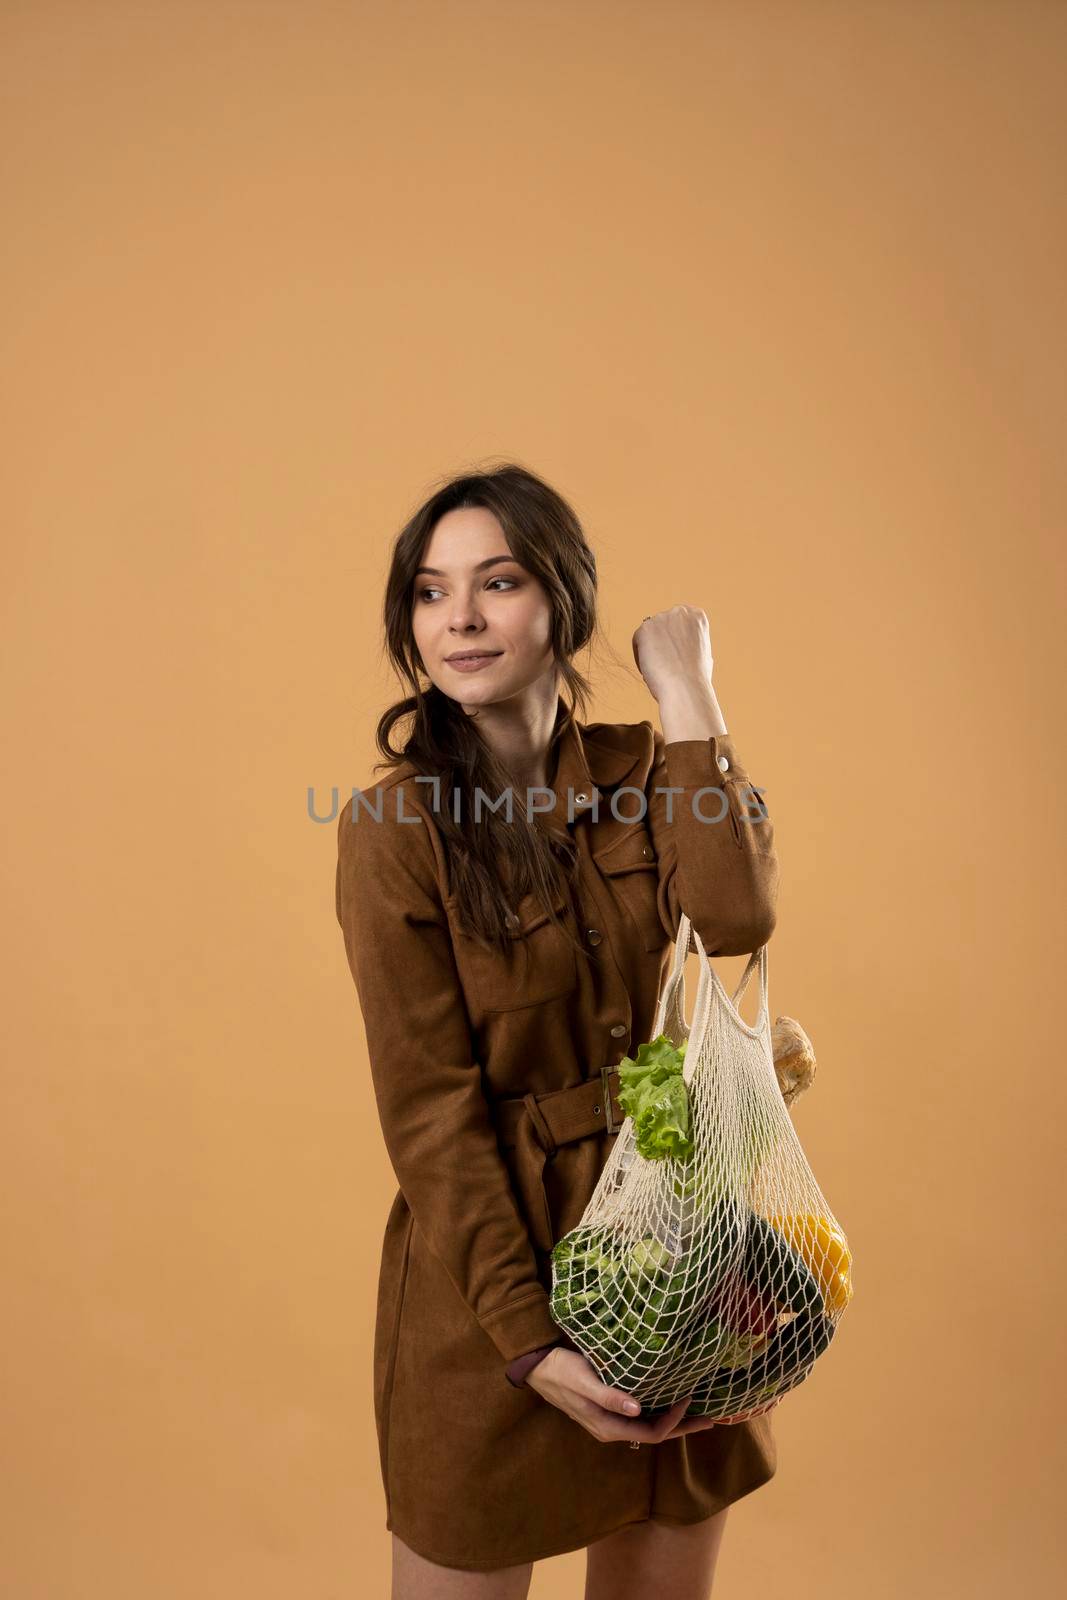 Reusable eco bag for shopping. String shopping bag with fruits and vegetables in the hands of a young woman. Zero waste, plastic free concept. Eco lifestyle. Eco shopping. by vovsht